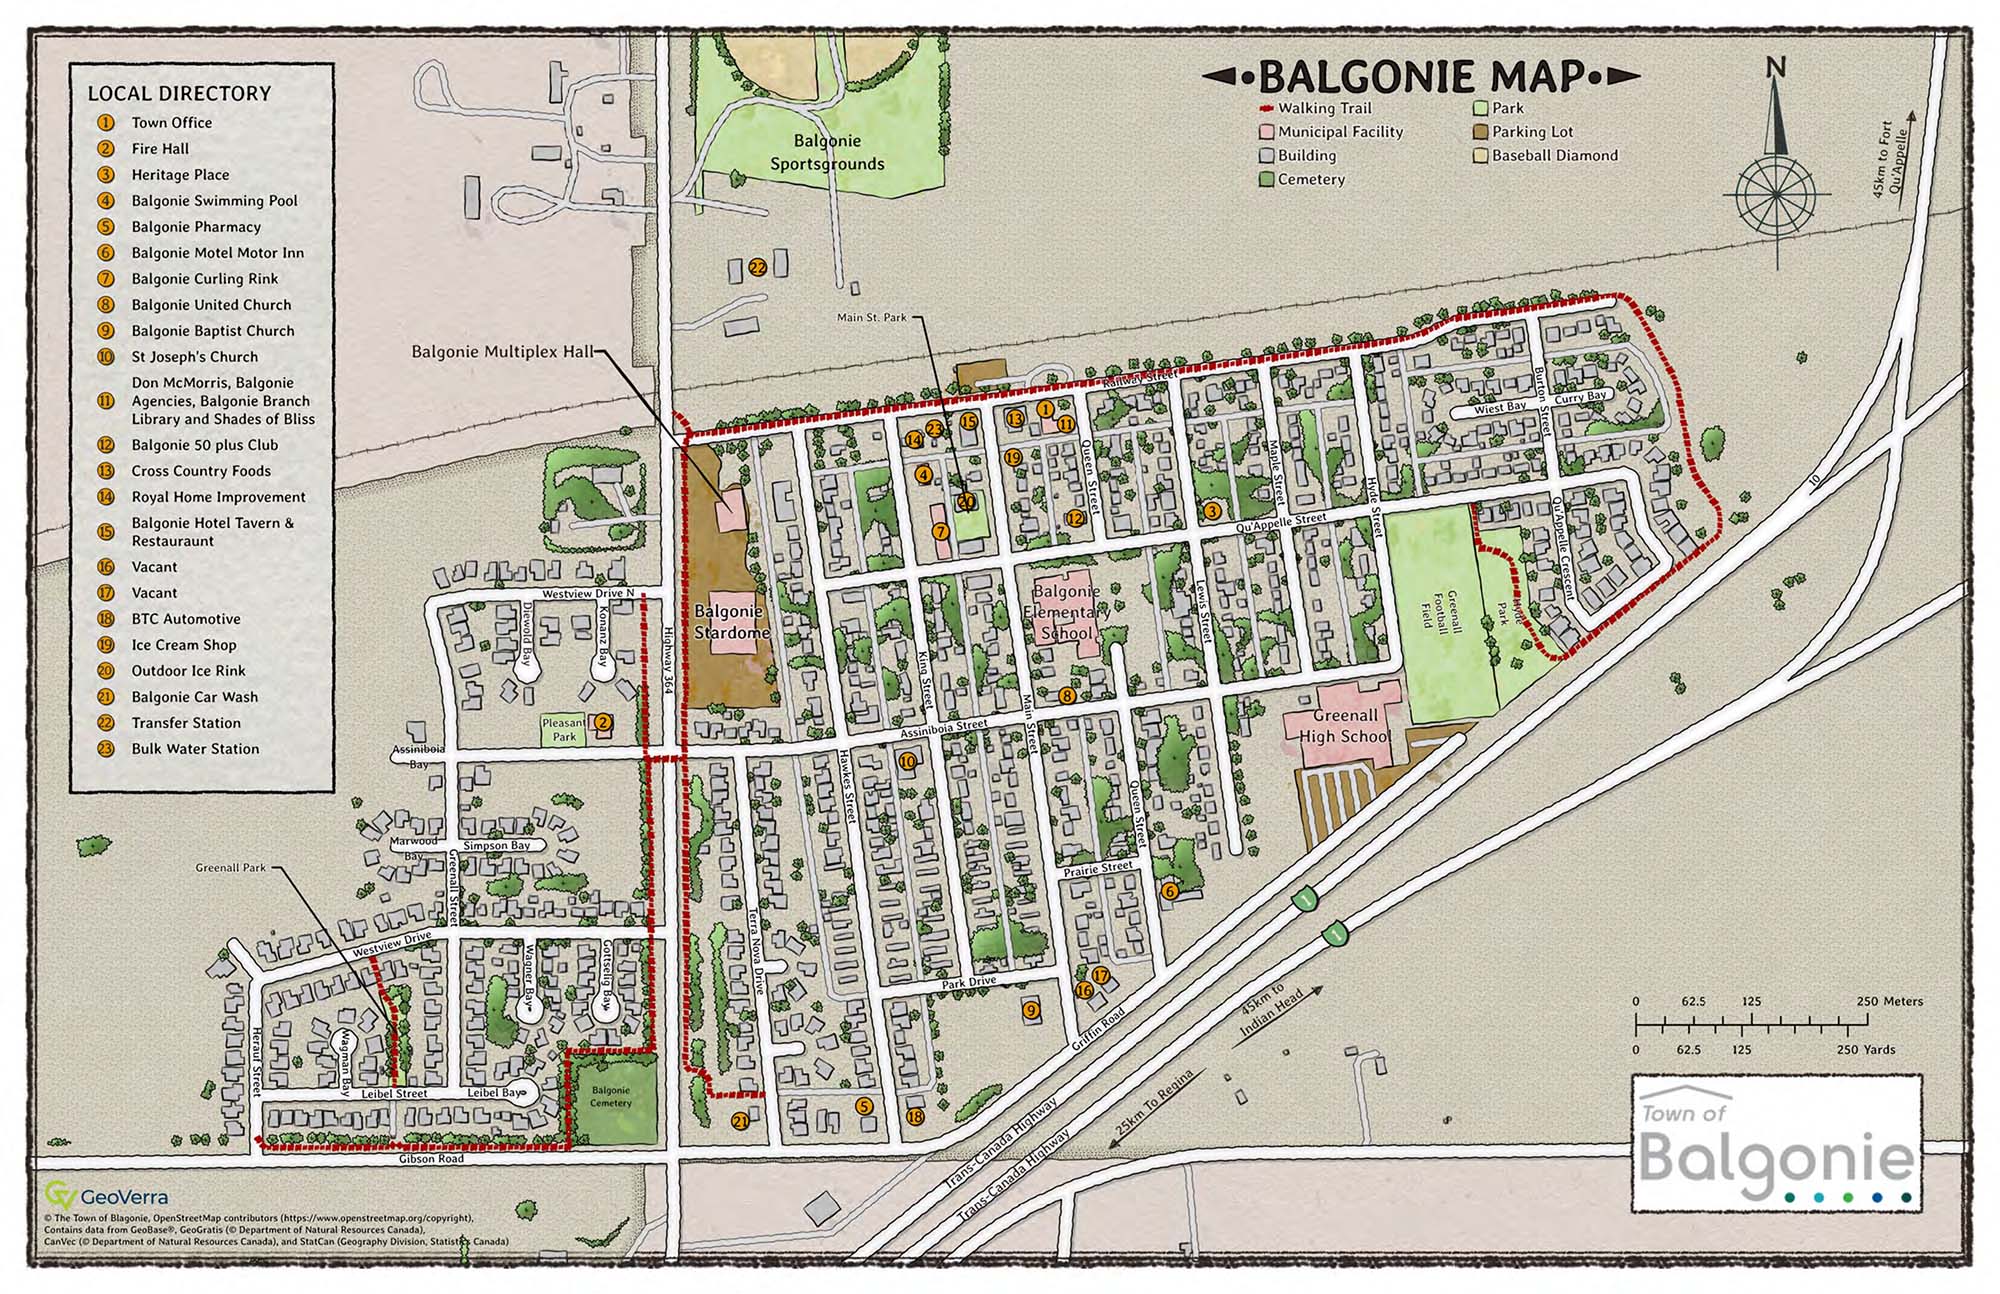 00 Balgonie Main Map From Geoverra Reduced 